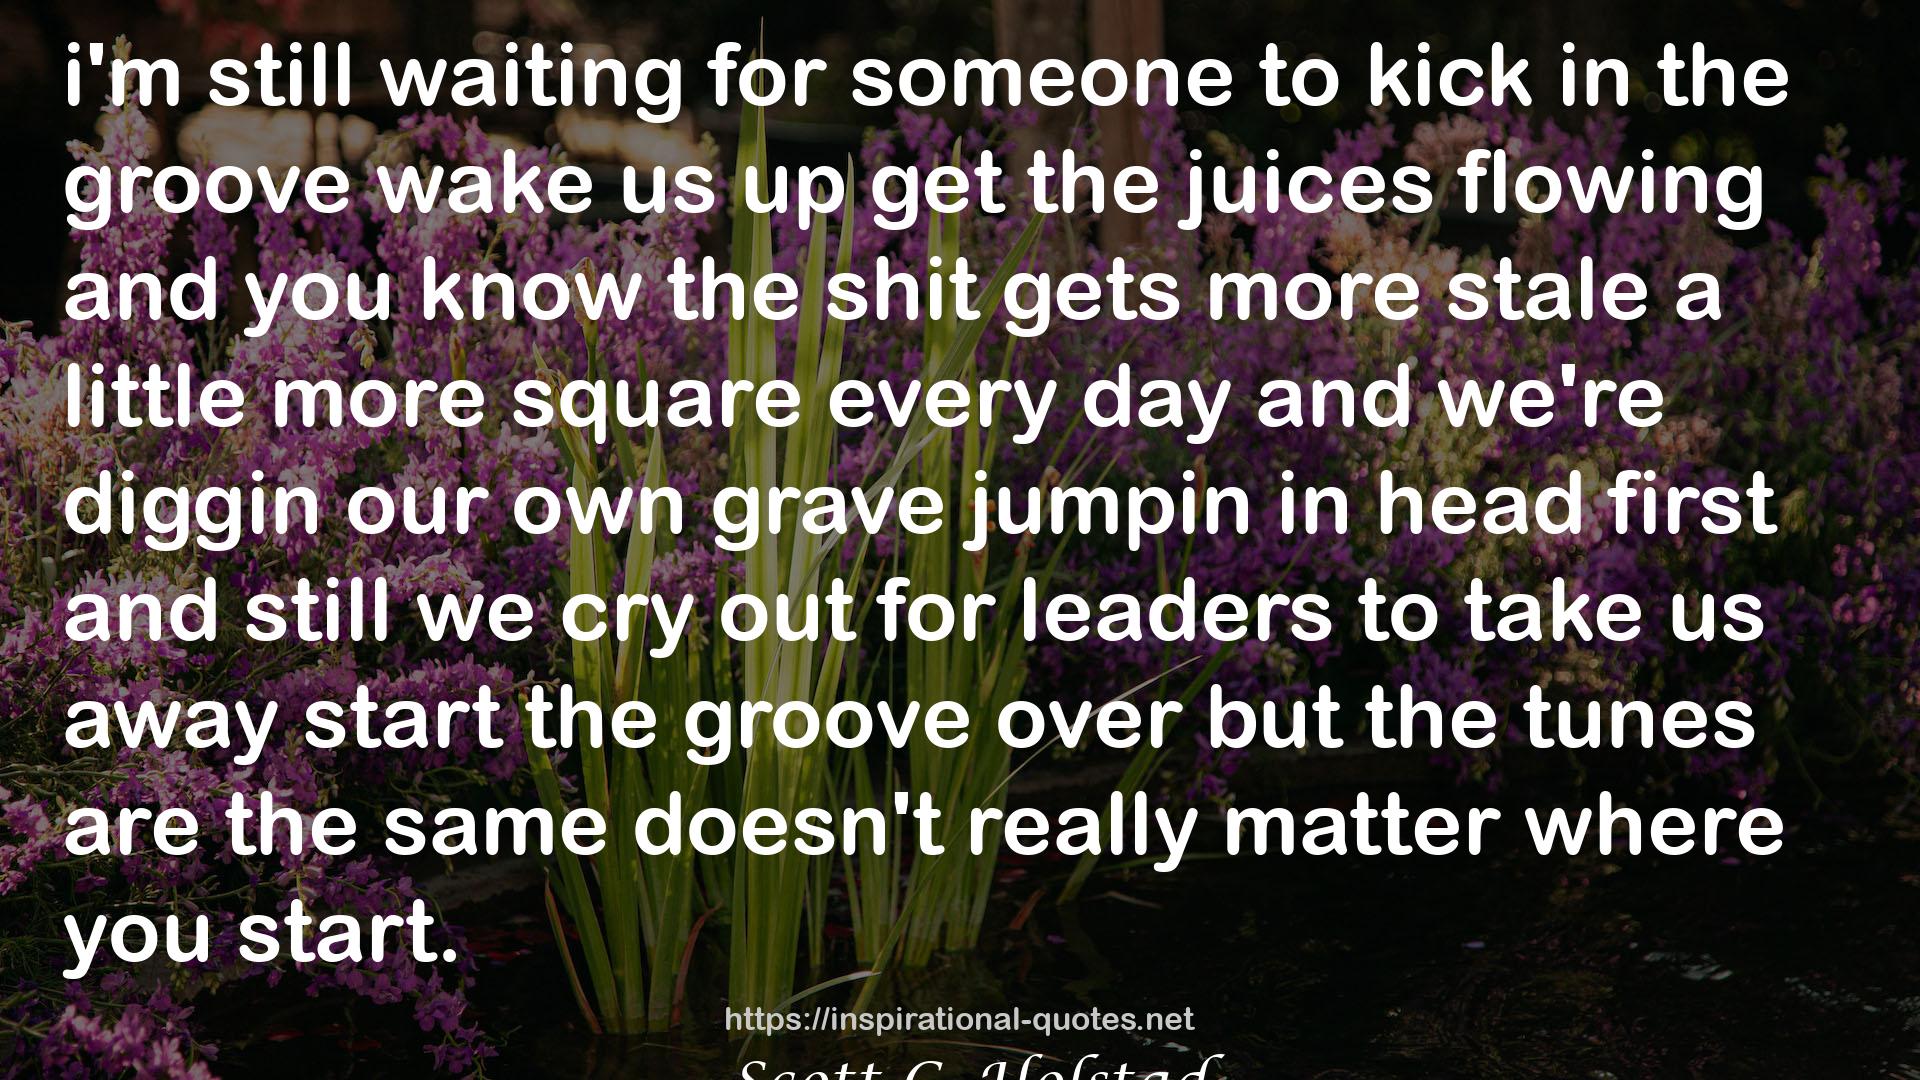 Scott C. Holstad quote : i'm still waiting for someone to kick in the groove wake us up get the juices flowing and you know the shit gets more stale a little more square every day and we're diggin our own grave jumpin in head first and still we cry out for leaders to take us away start the groove over but the tunes are the same doesn't really matter where you start.